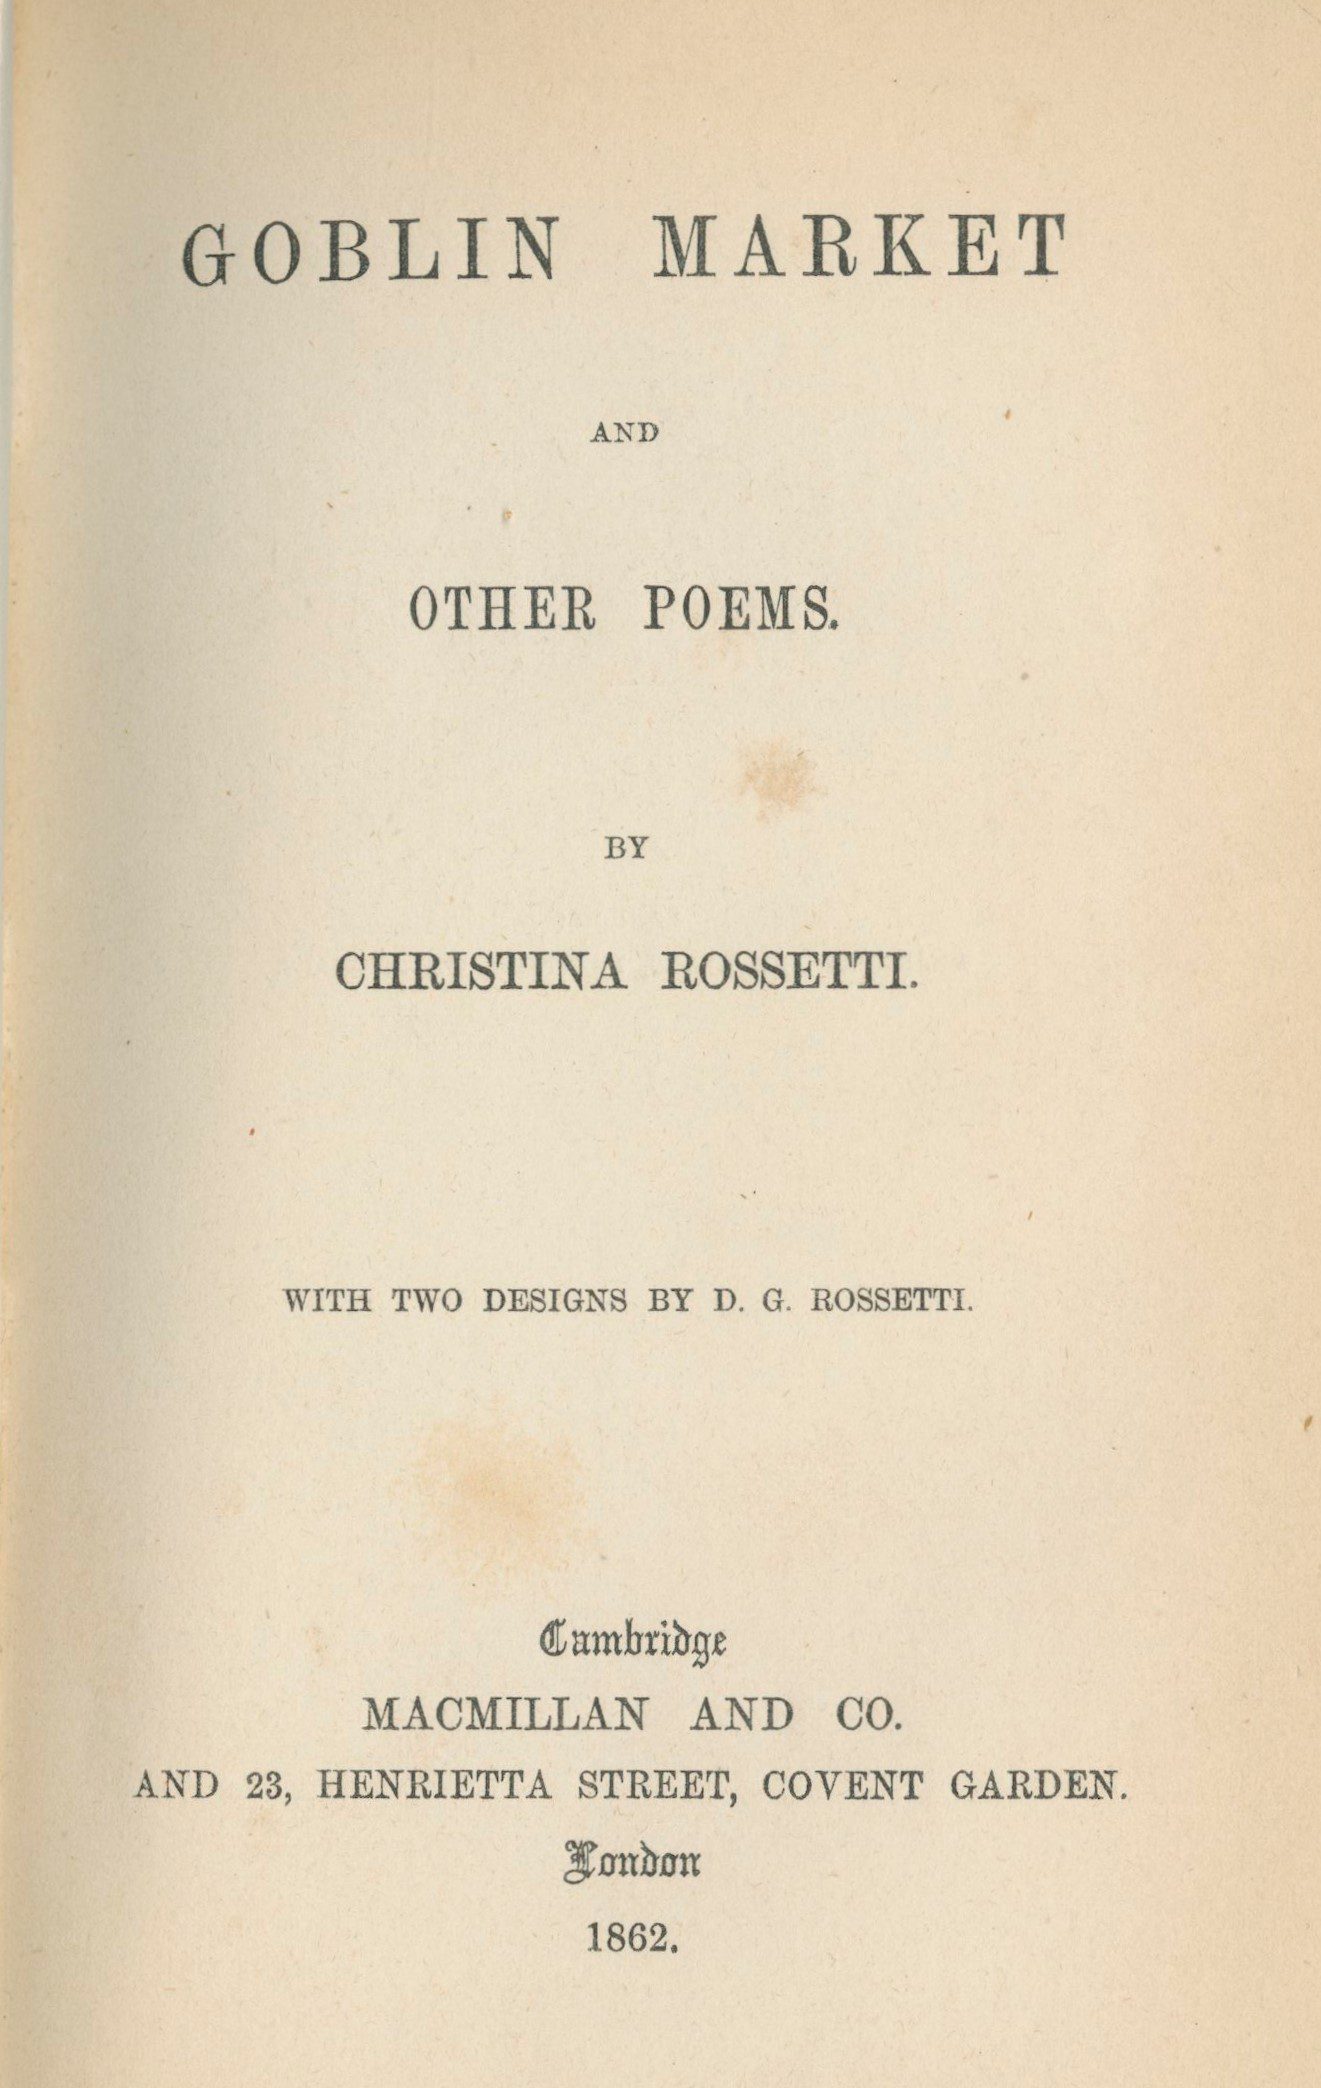 Titlepage for Goblin Market and Other Poems, 1862.